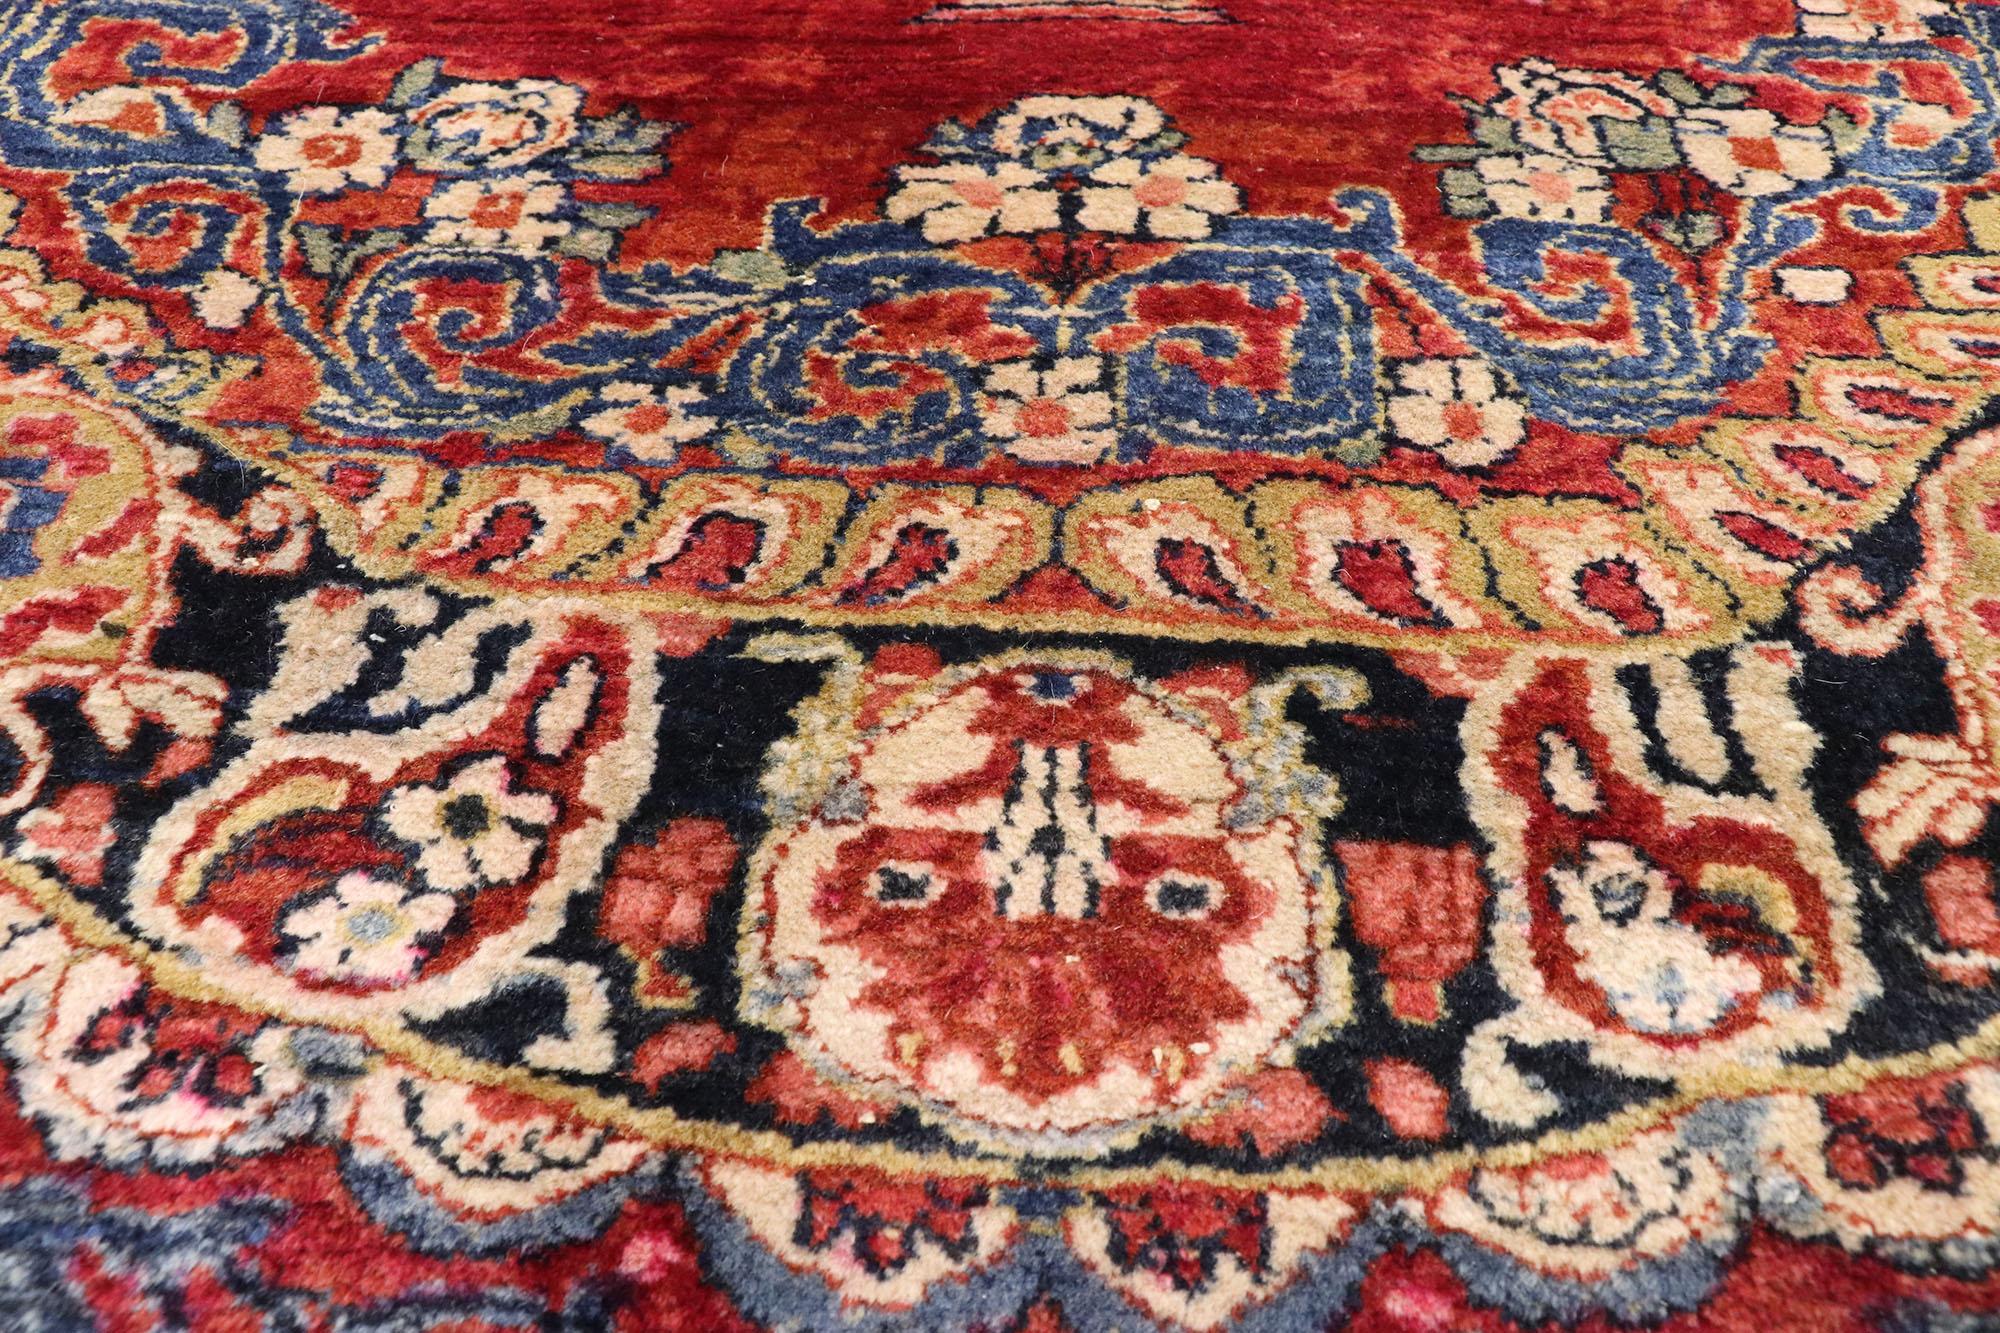 Hand-Knotted Antique Persian Sarouk Rug with Floral Victorian Style